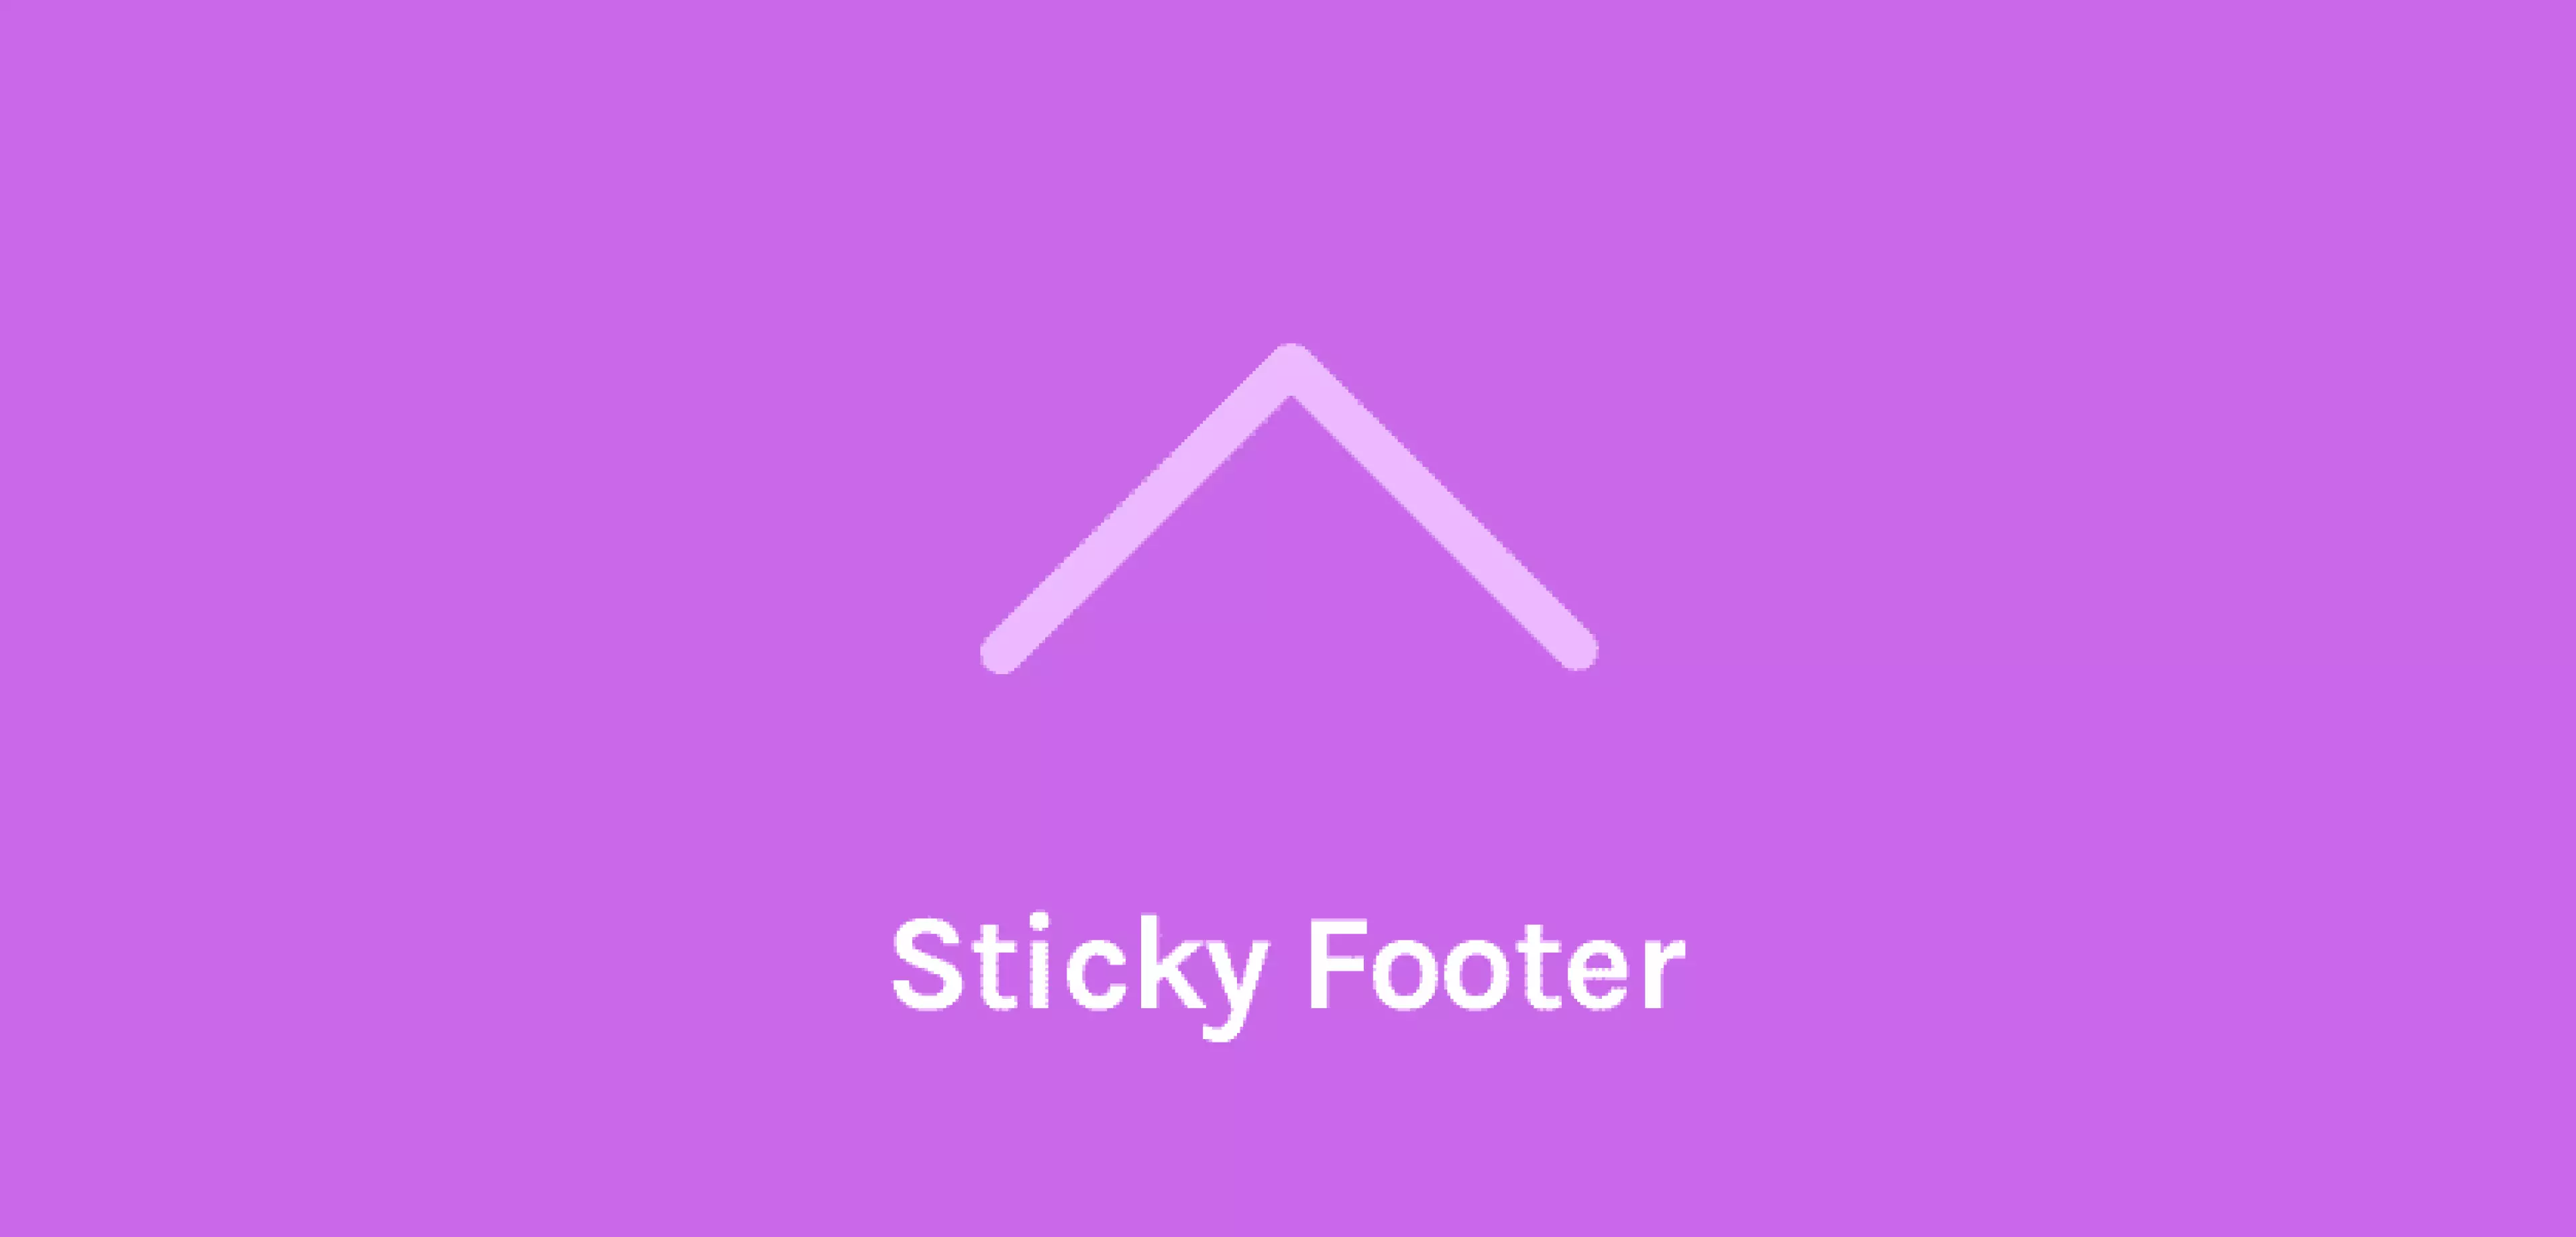 Oceanwp - Sticky Footer